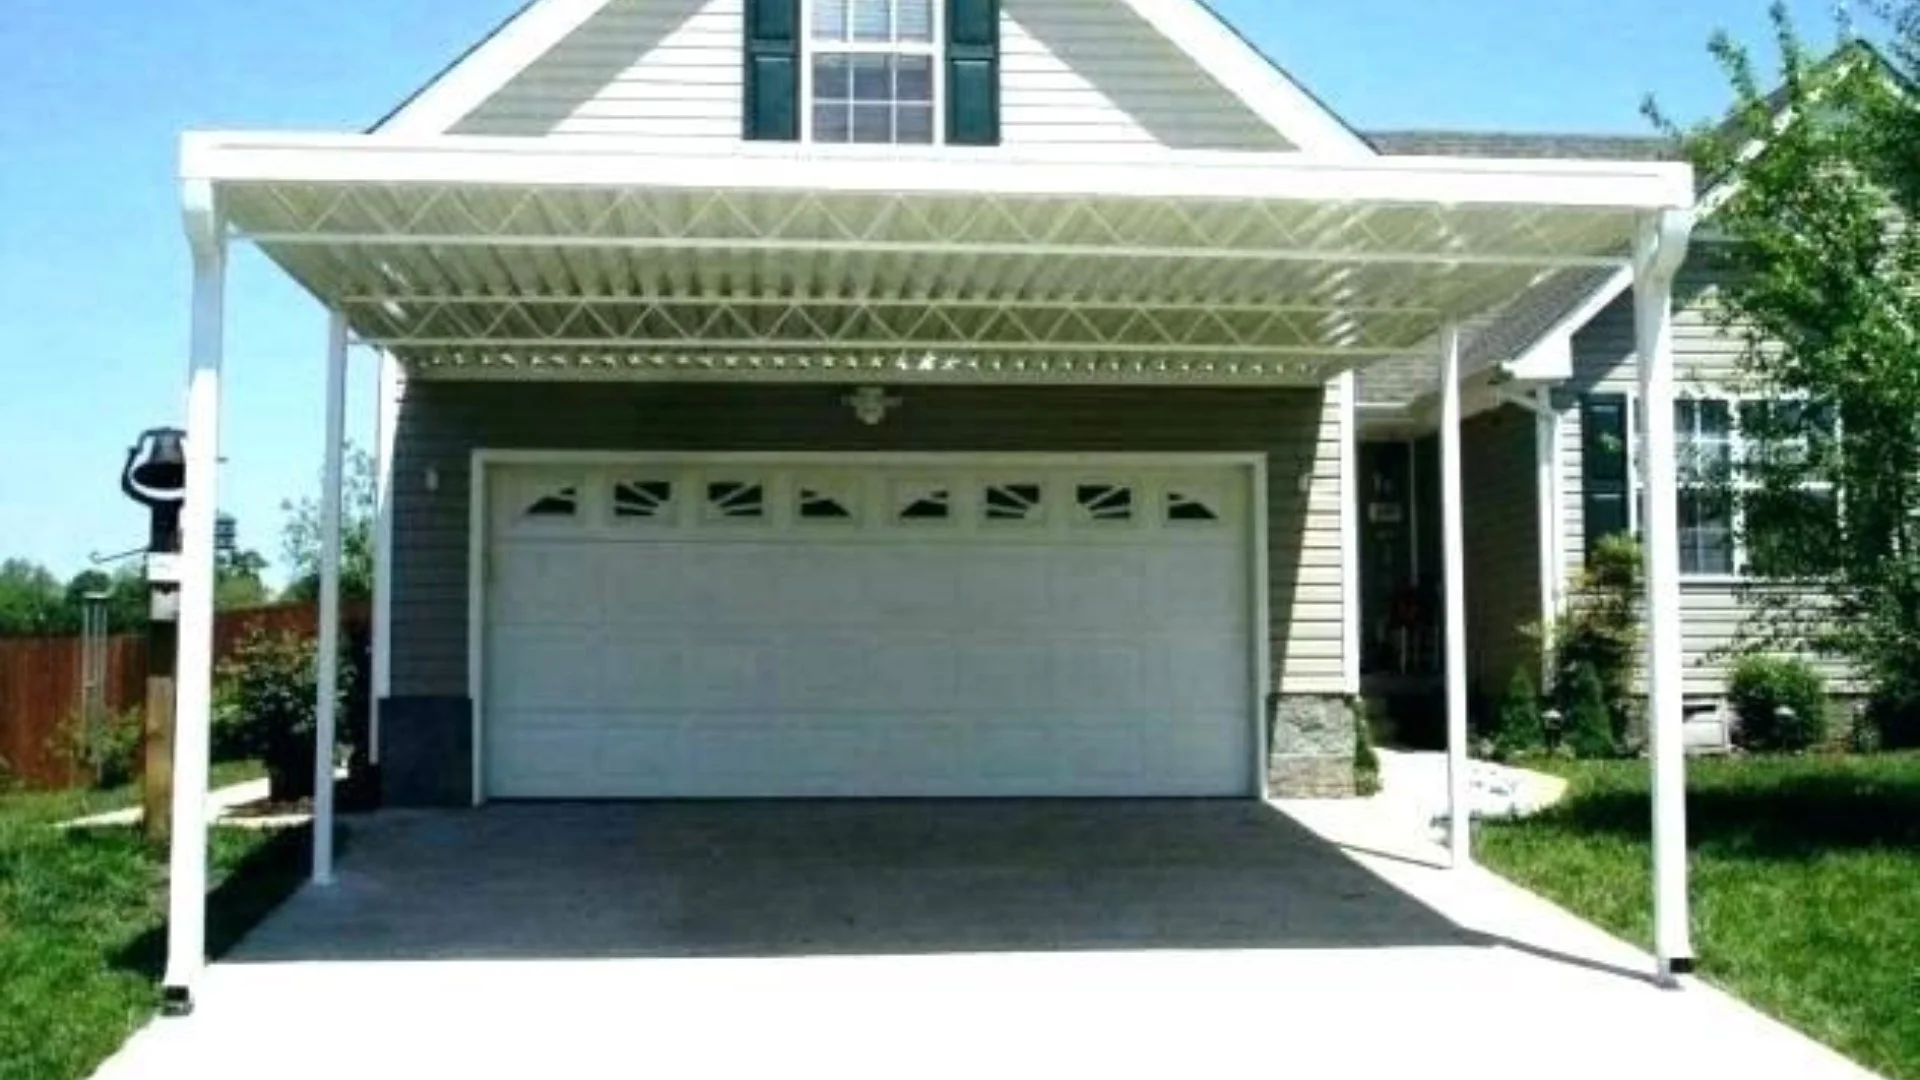 Carports Can Help Keep Your Vehicle in Great Condition!